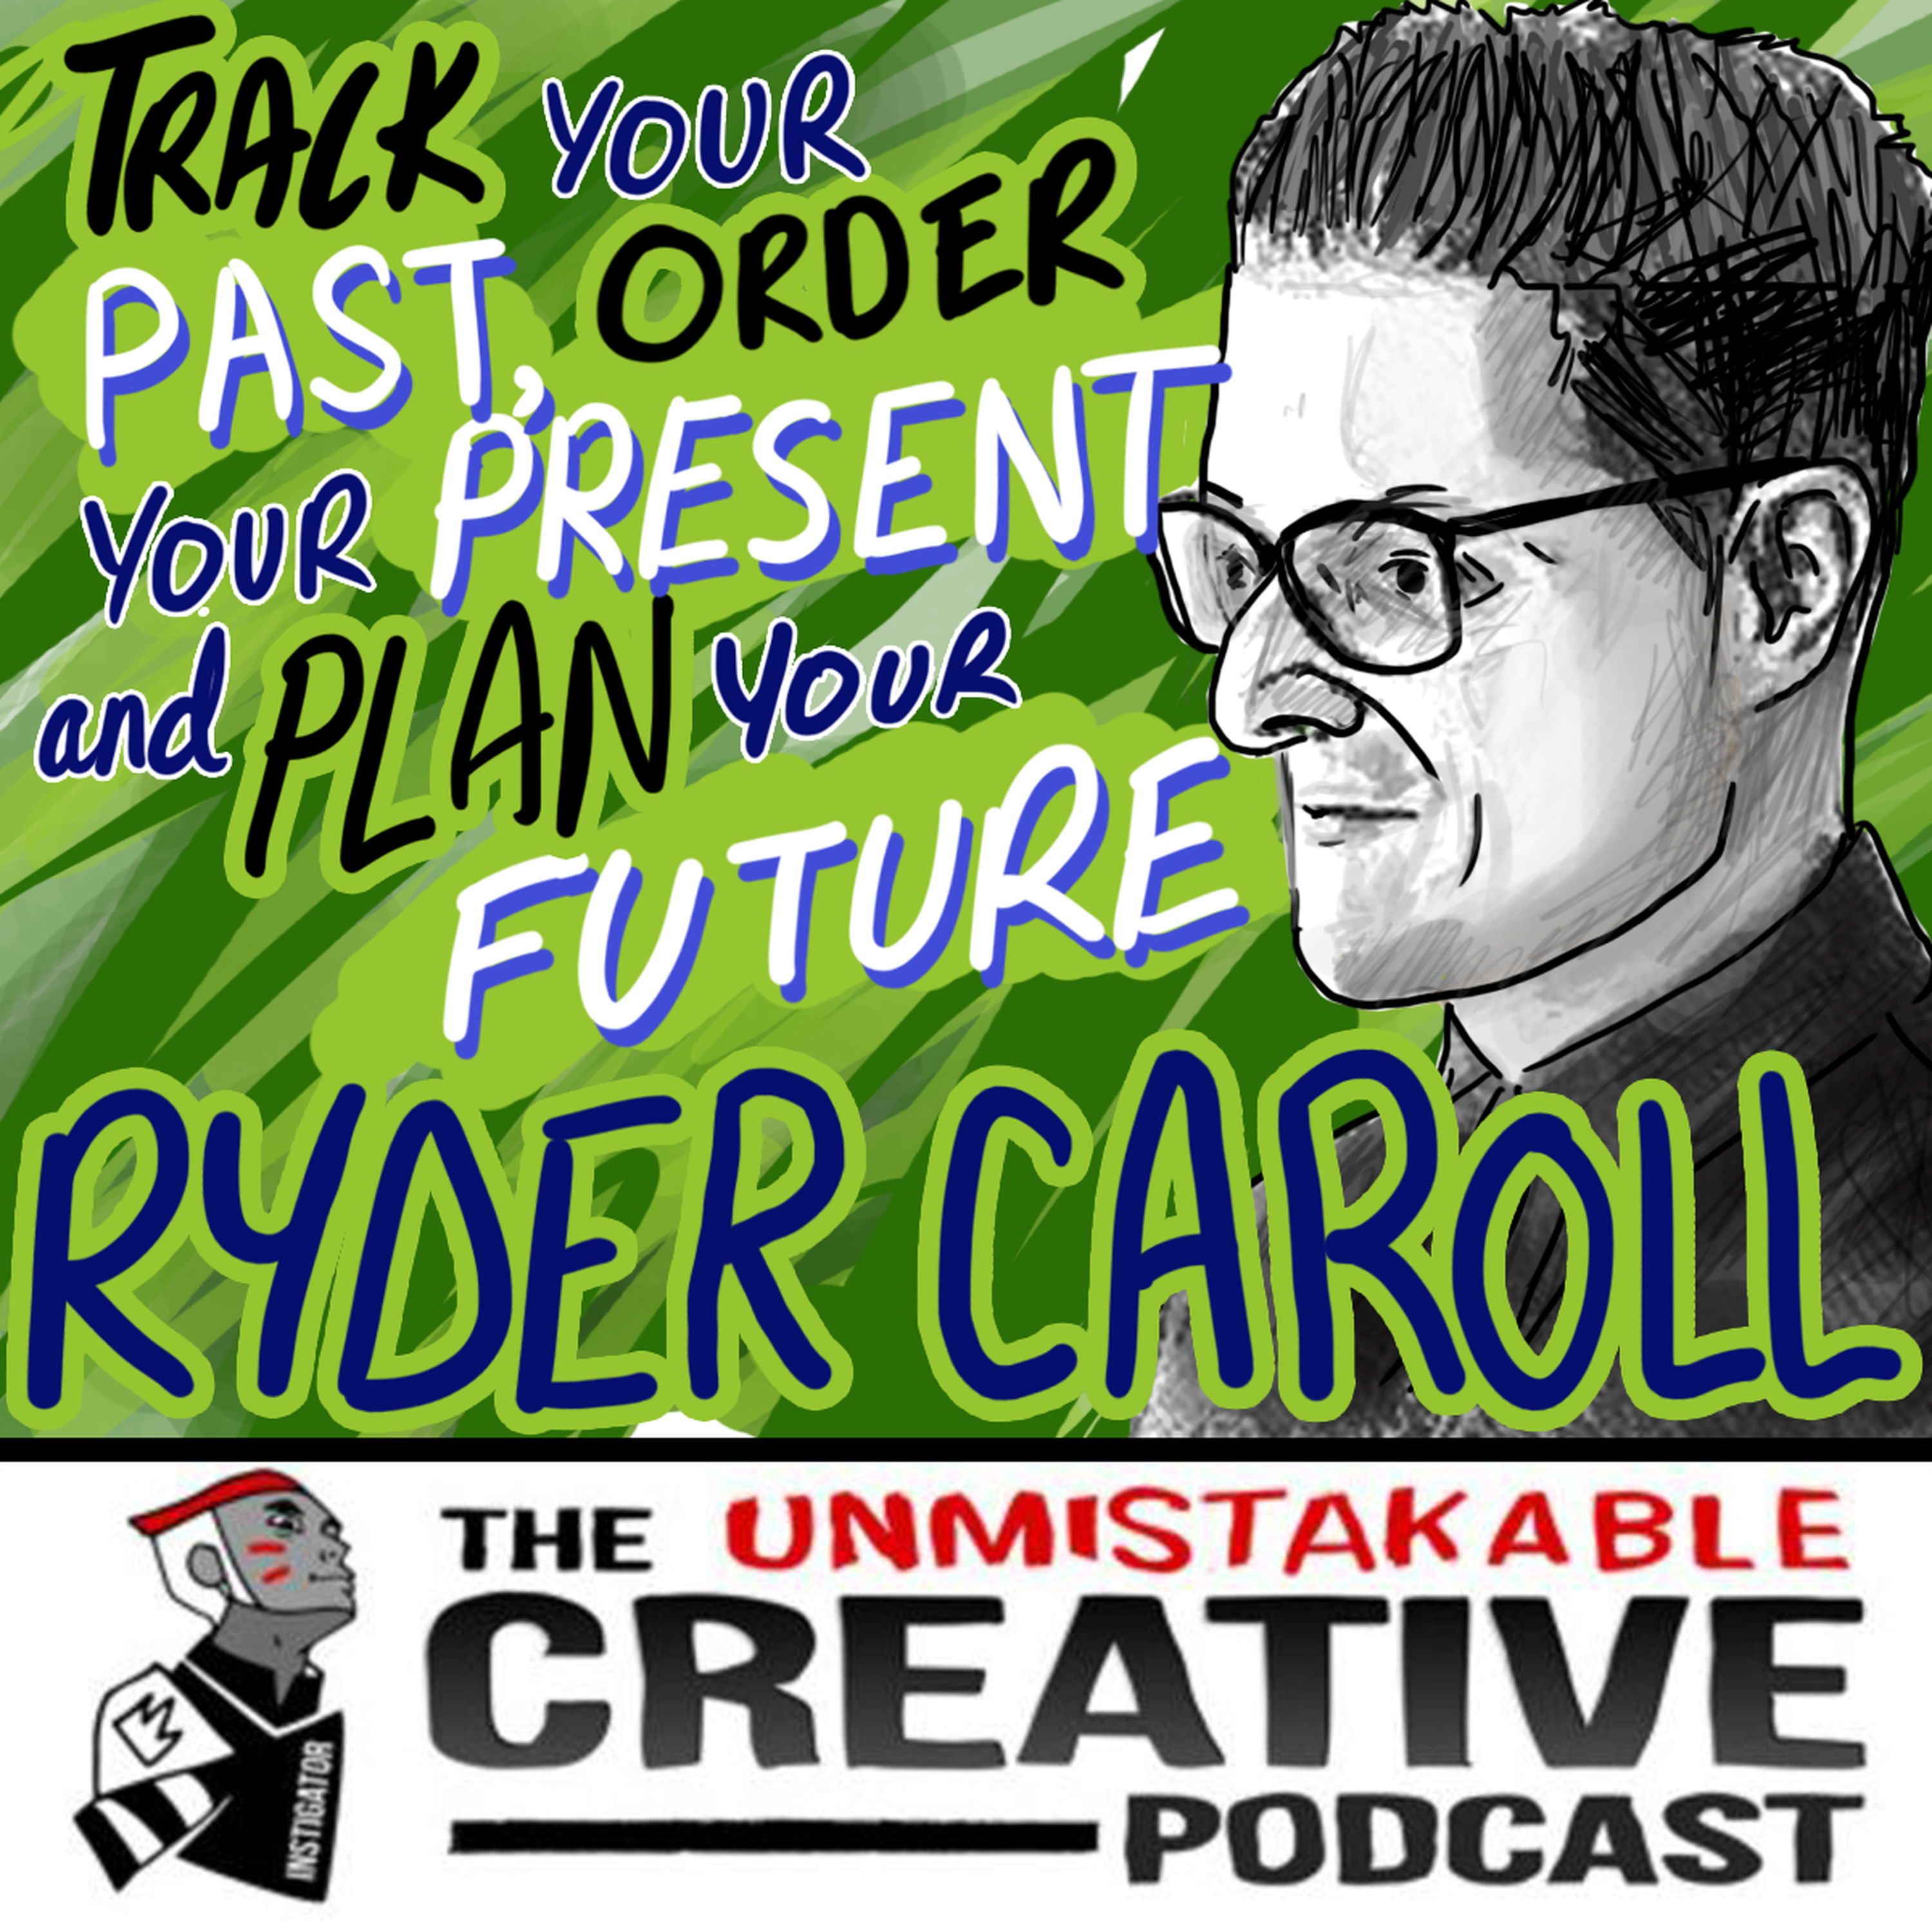 Track Your Past, Order Your Present, and Plan Your Future with Ryder Carroll